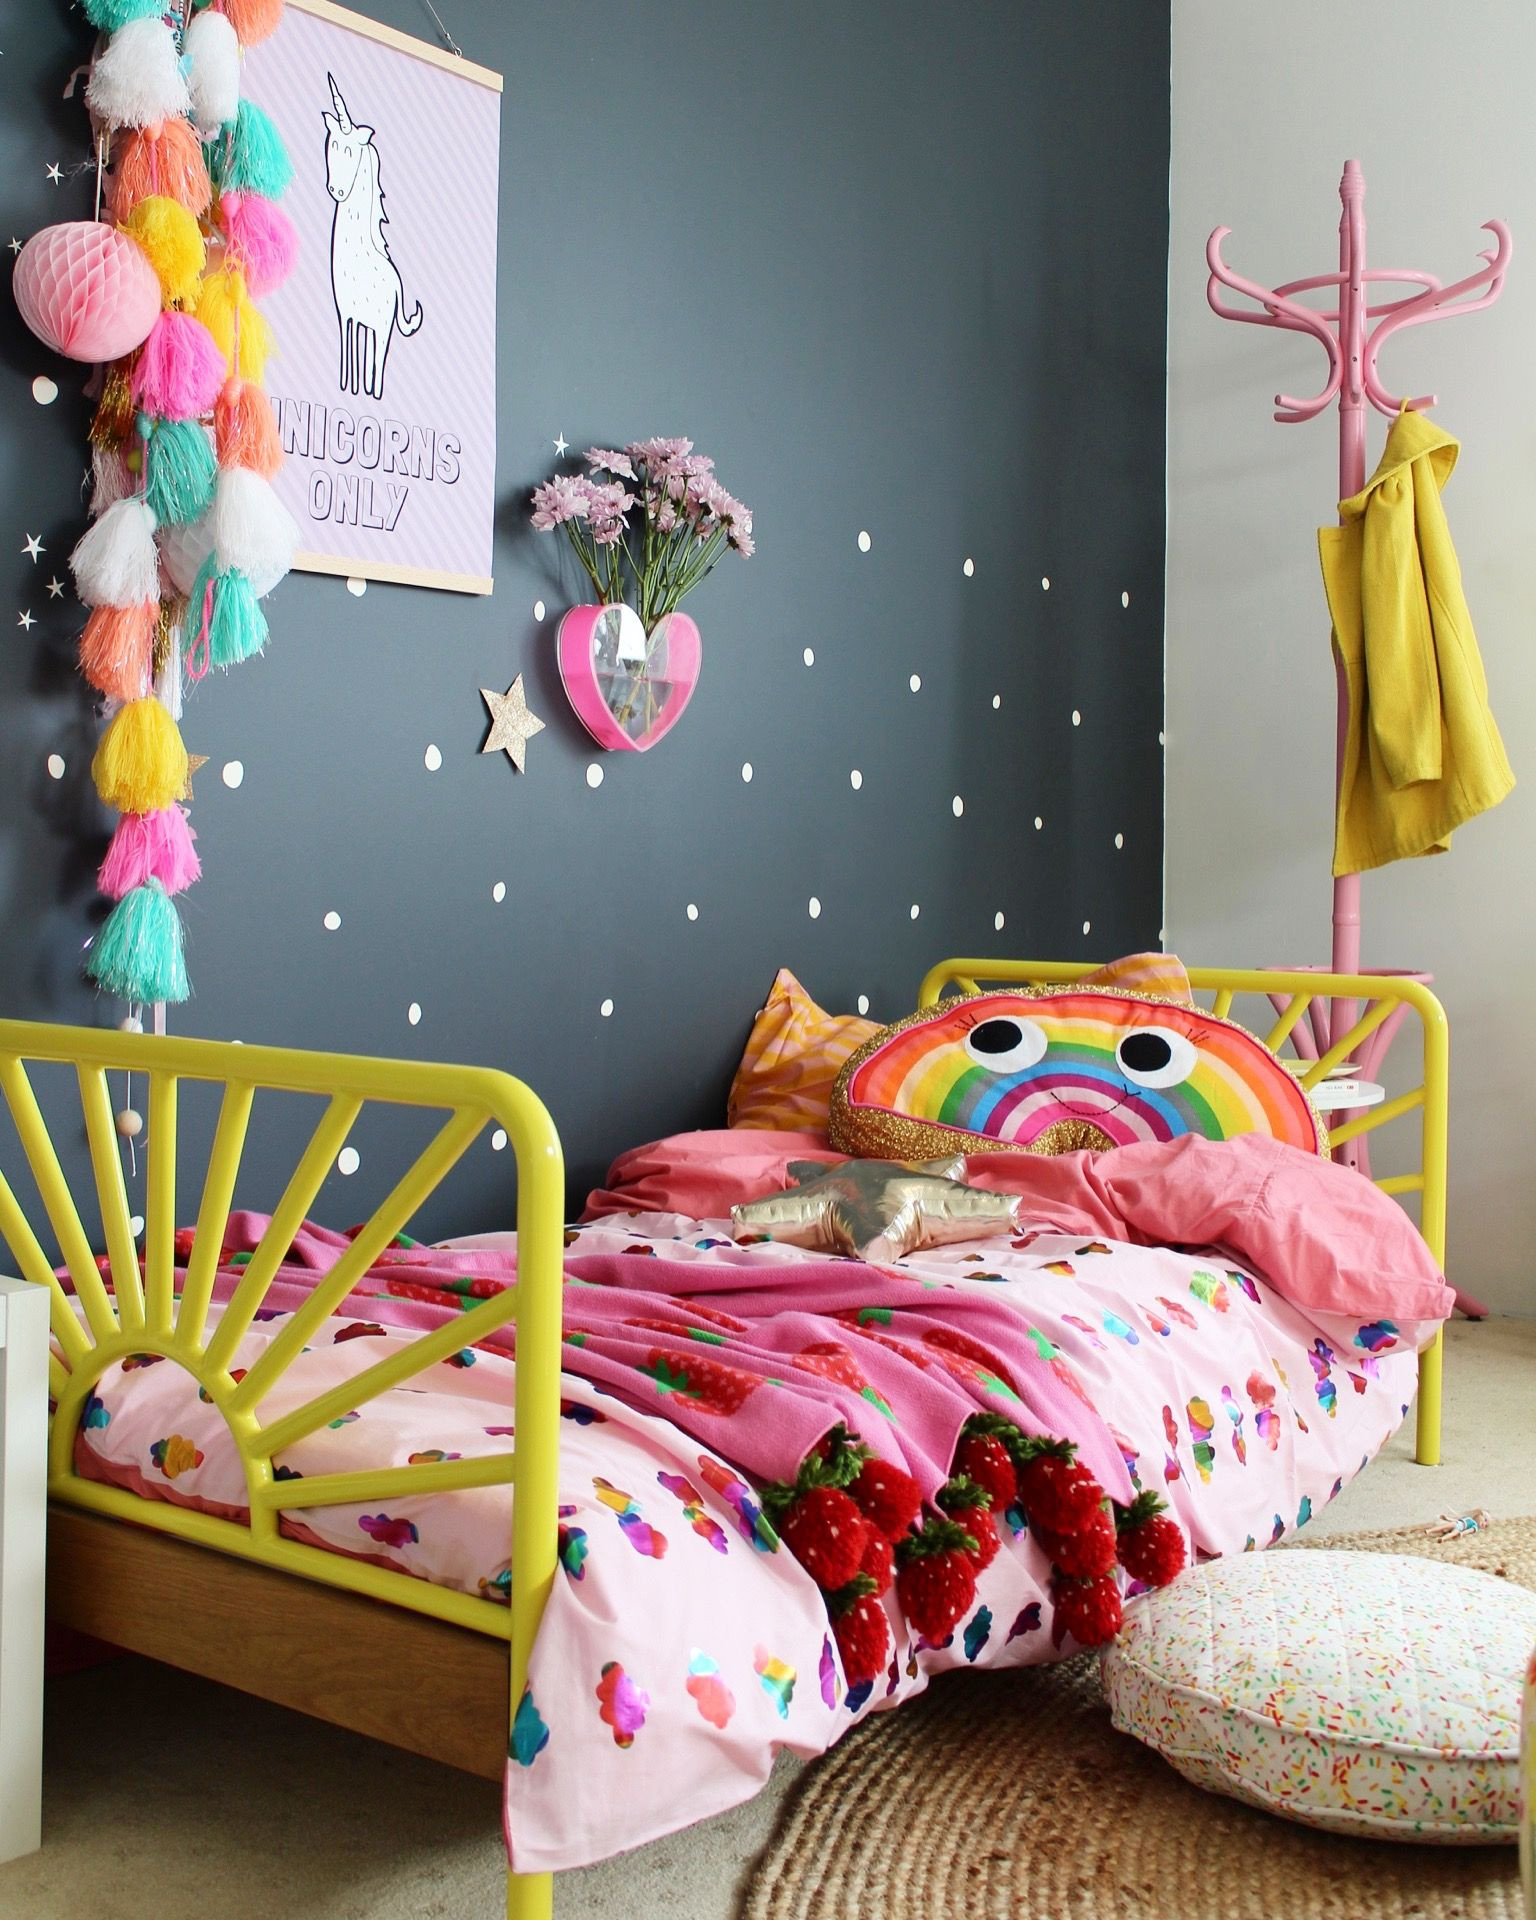 DIY Toddler Girl Room Decor
 Cloudy With a Chance of Rainbows